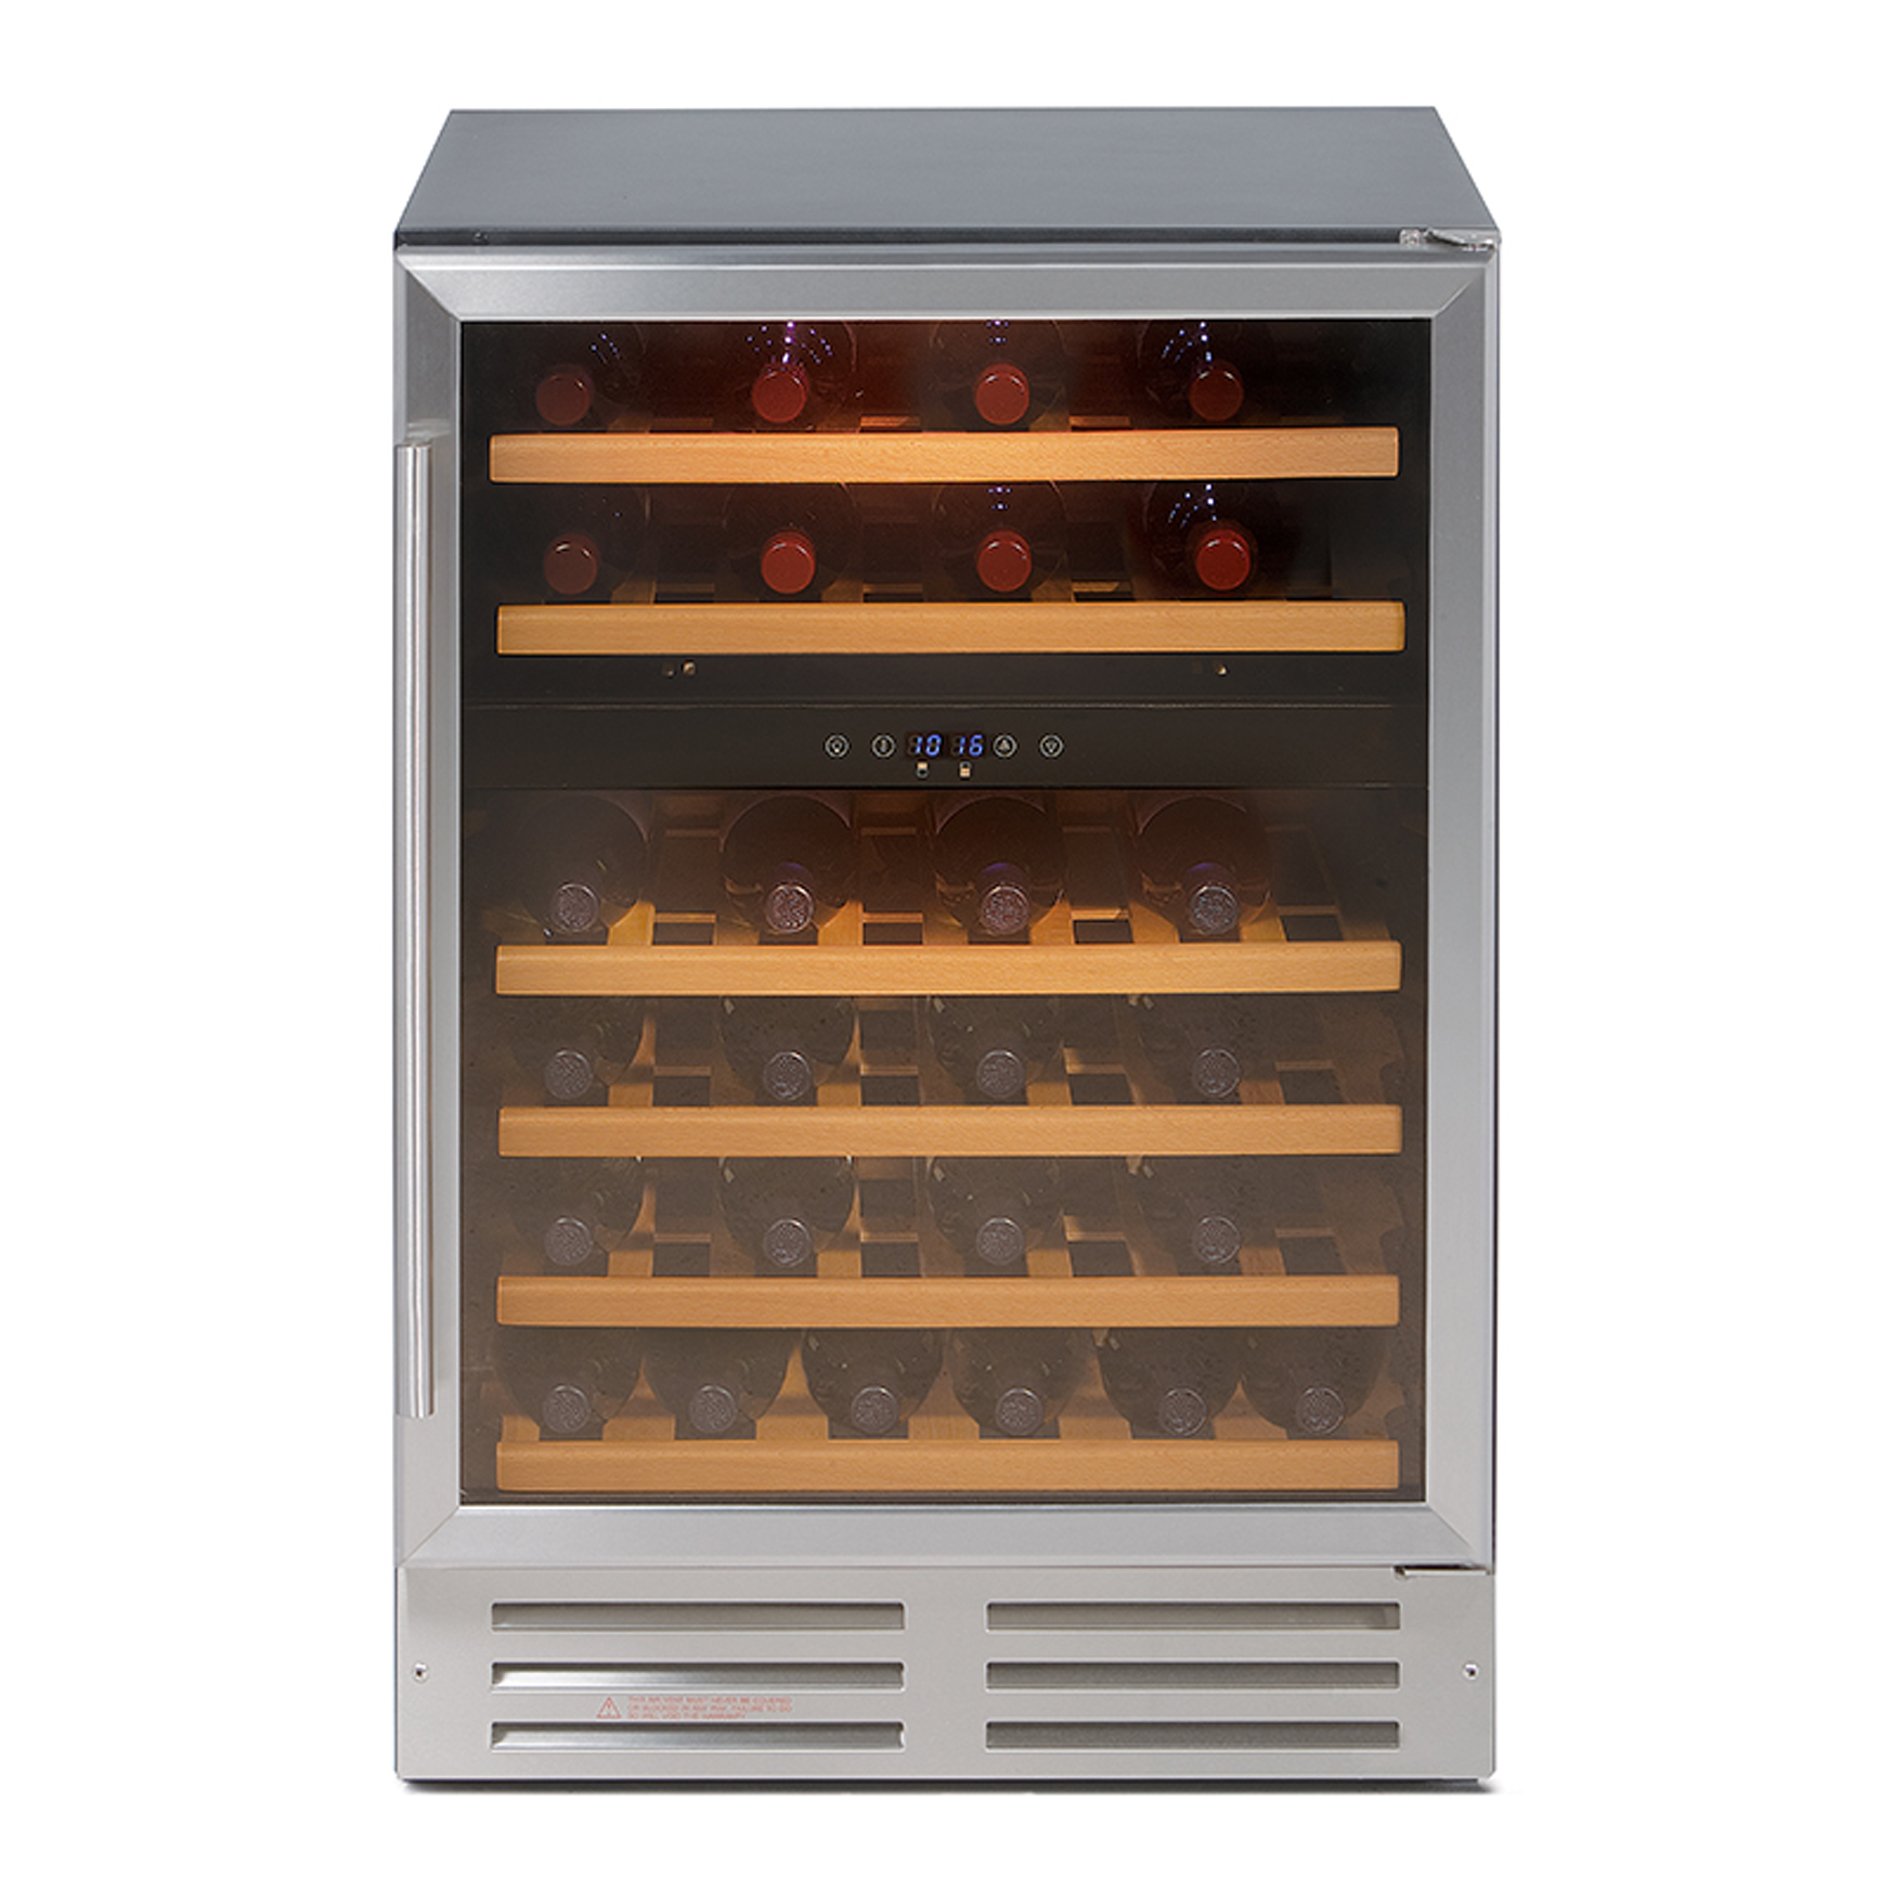 600mm integrated wine cooler offers ample space for 46 bottles of wine. Additional features include easy to use controls, 6 wooden shelves and adjustable thermostat.